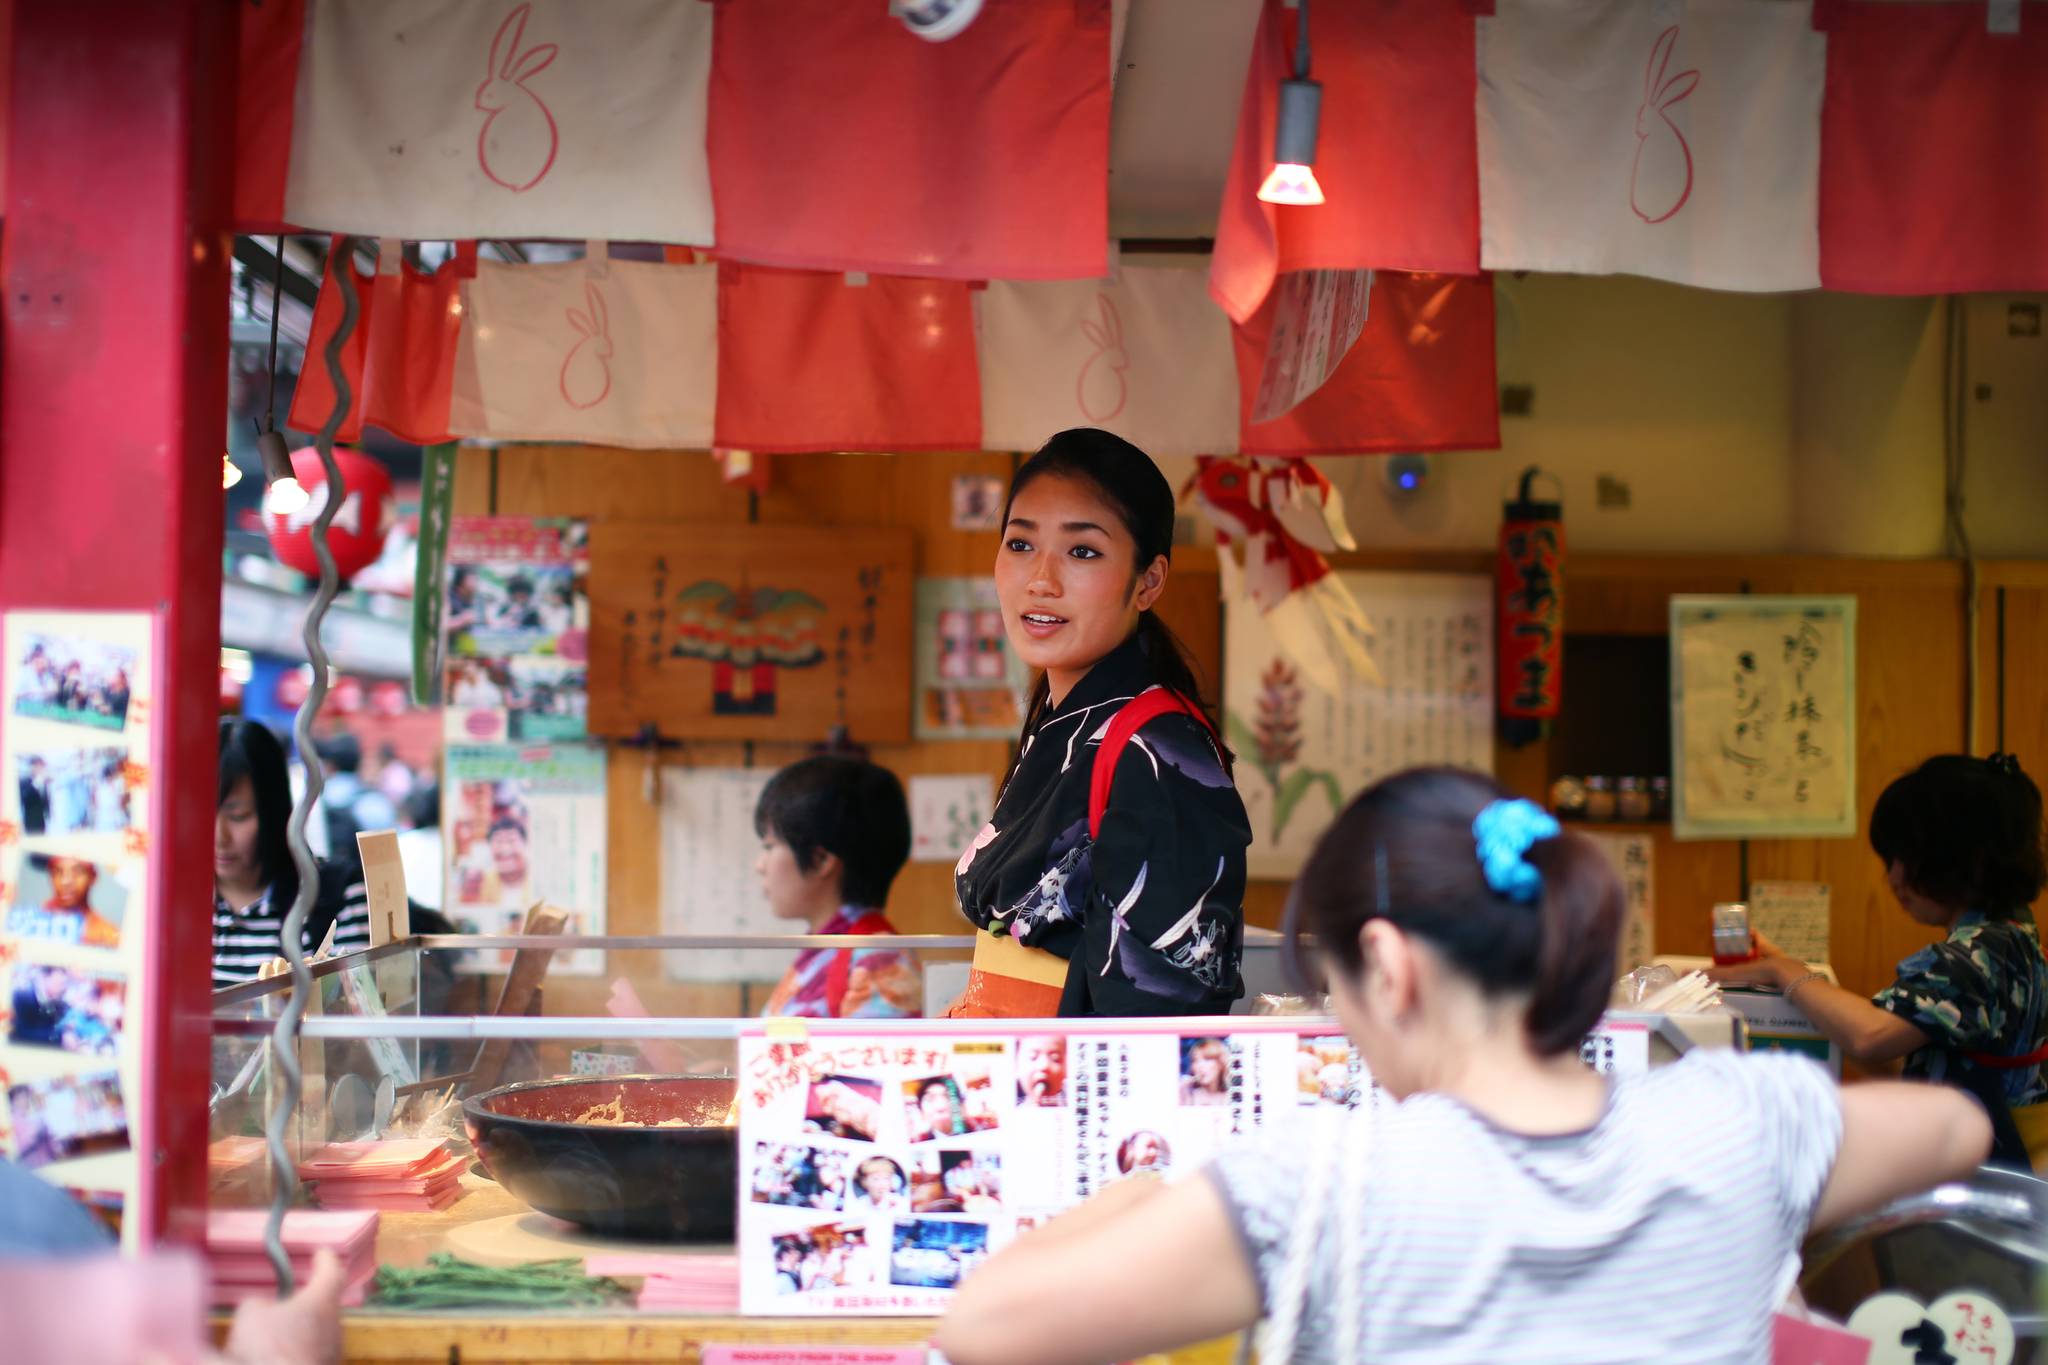 Why Japan wants to offer the world selfless hospitality